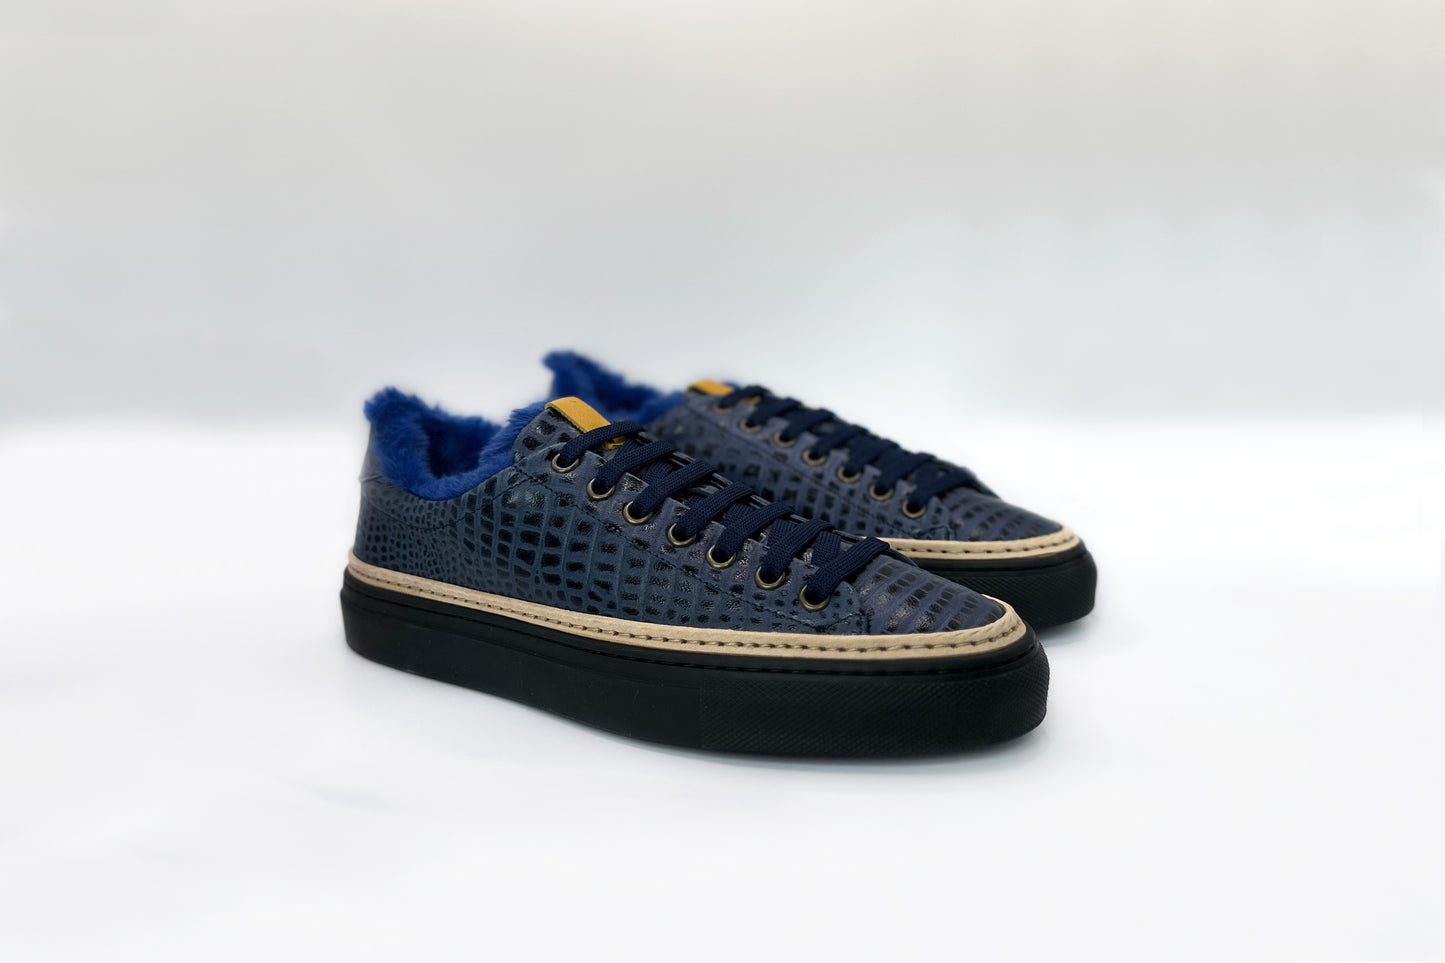 Men’s Navy Blue Leather Sneakers with Blue Eco-Fur